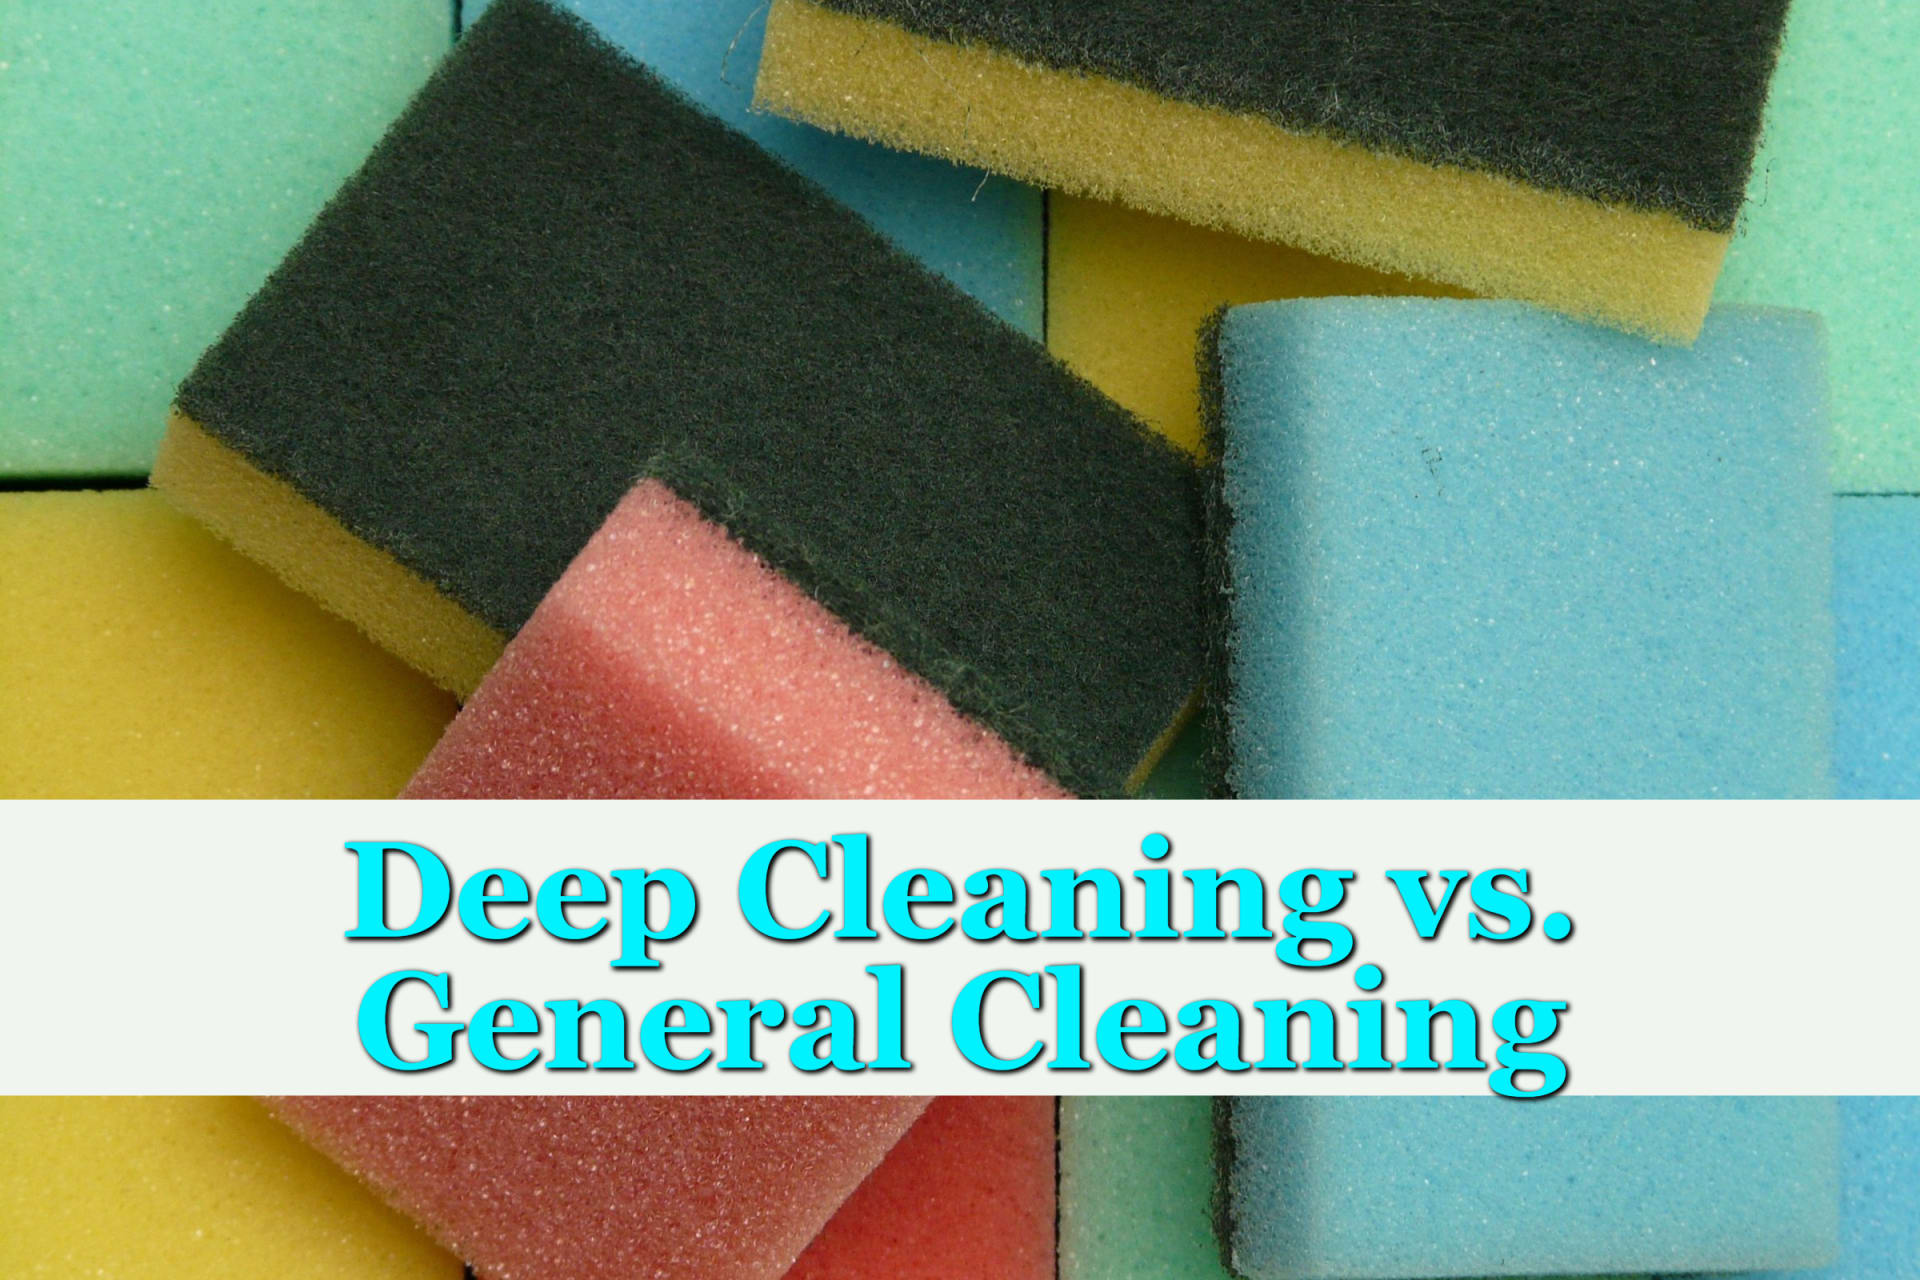 Assorted sponges for deep cleaning